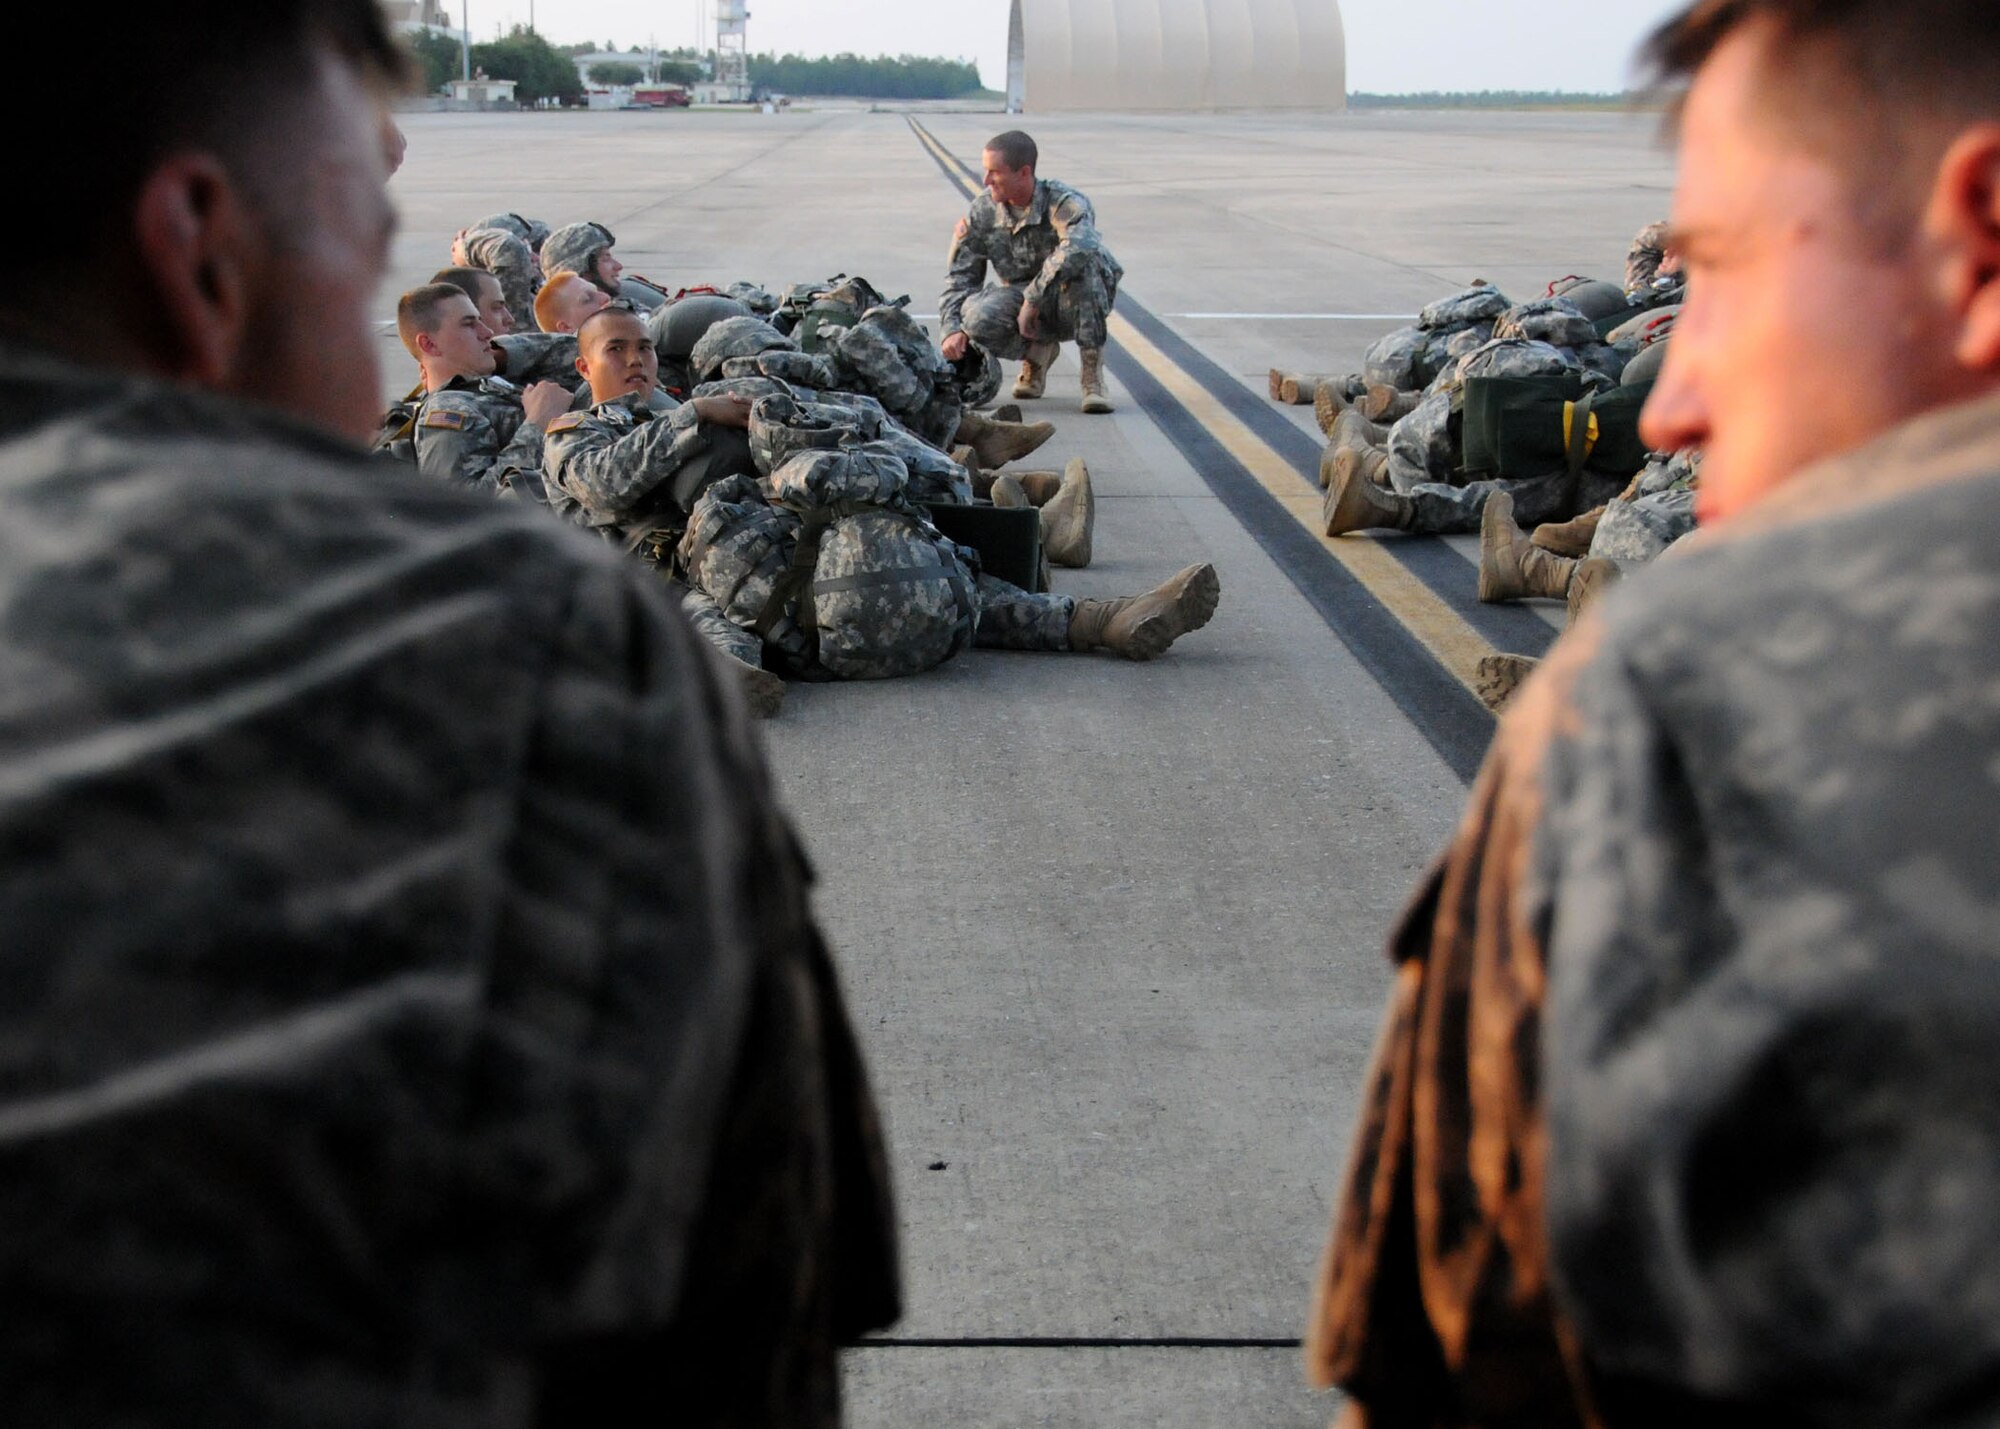 Army privates, students awaiting training at the U.S. Army Airborne School, wait to board the aircraft for a simulated jump on the flight line at Duke Field, Fla., June 15. The production company, WILL Interactive, started work on a choose-your-own-adventure film for Department of Defense jumpmaster training at Fort Benning, Ga., with help from members from the U.S. Army Airborne School. However, when the crew needed a C-130 in portions of the video, the 919th Special Operations Wing offered to support the project at Duke Field June 13-15. (U.S. Air Force photo/Tech. Sgt. Cheryl Foster) 